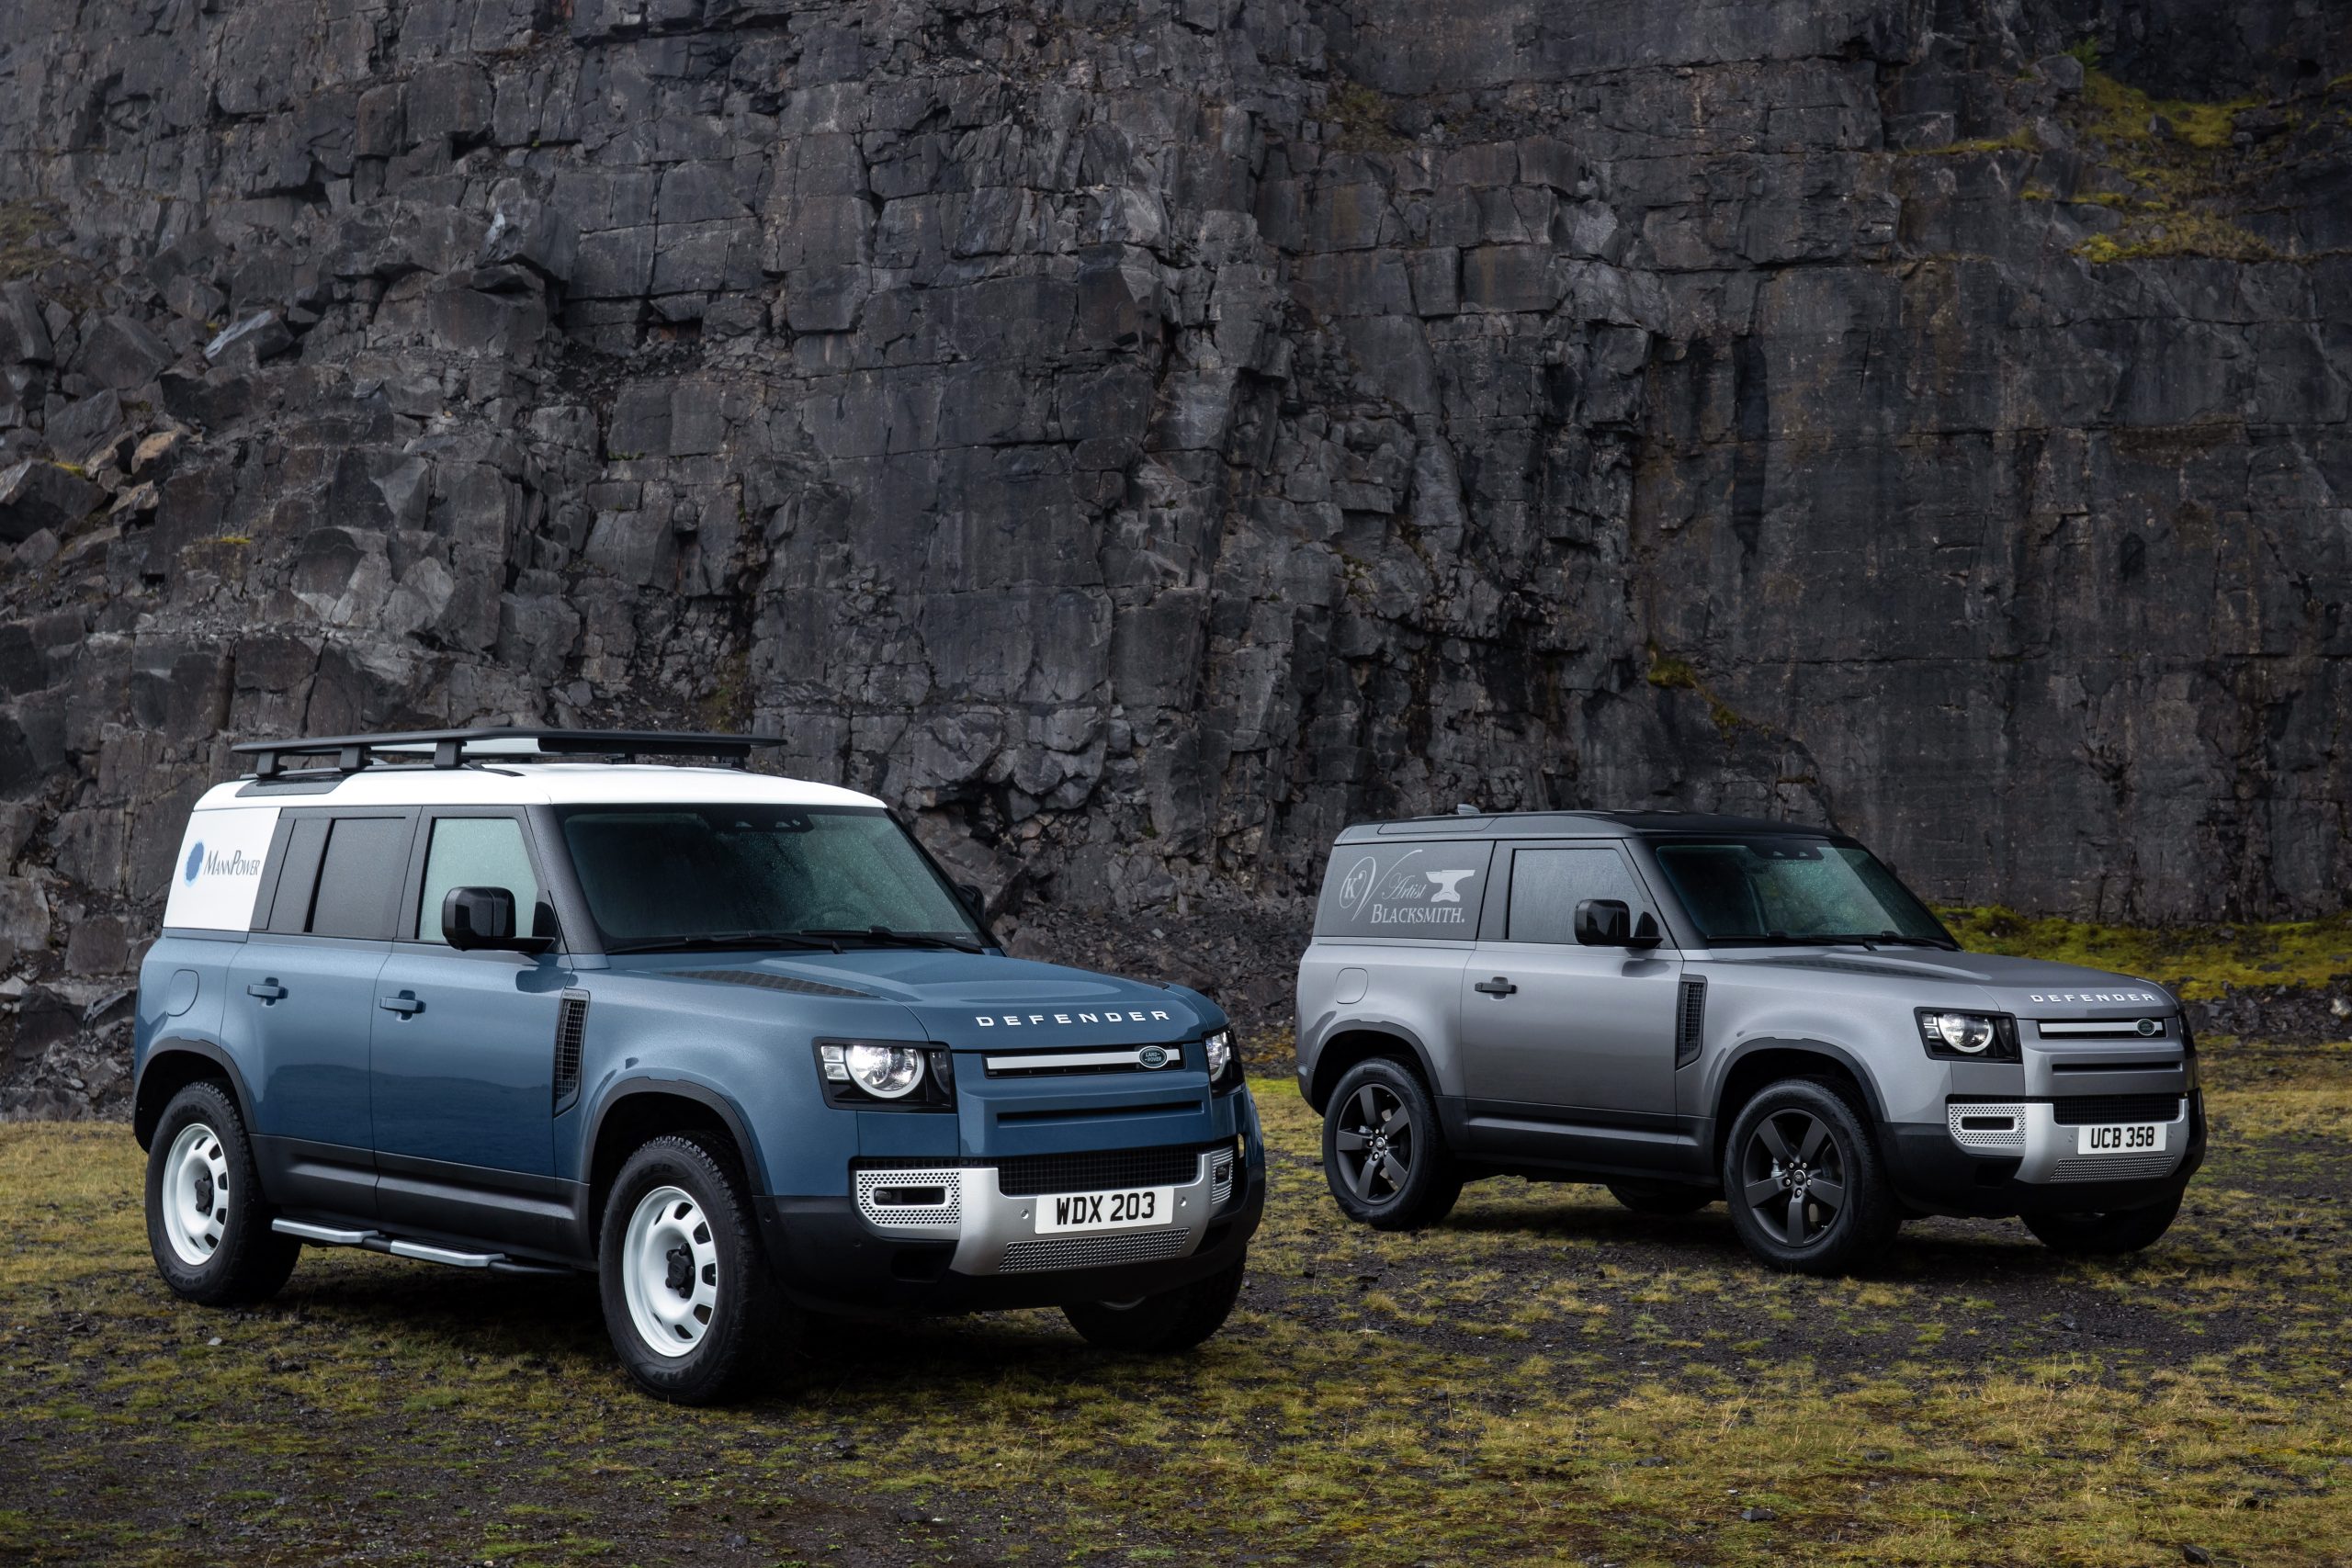 2020 Land Rover Defender India launch on October 15: First